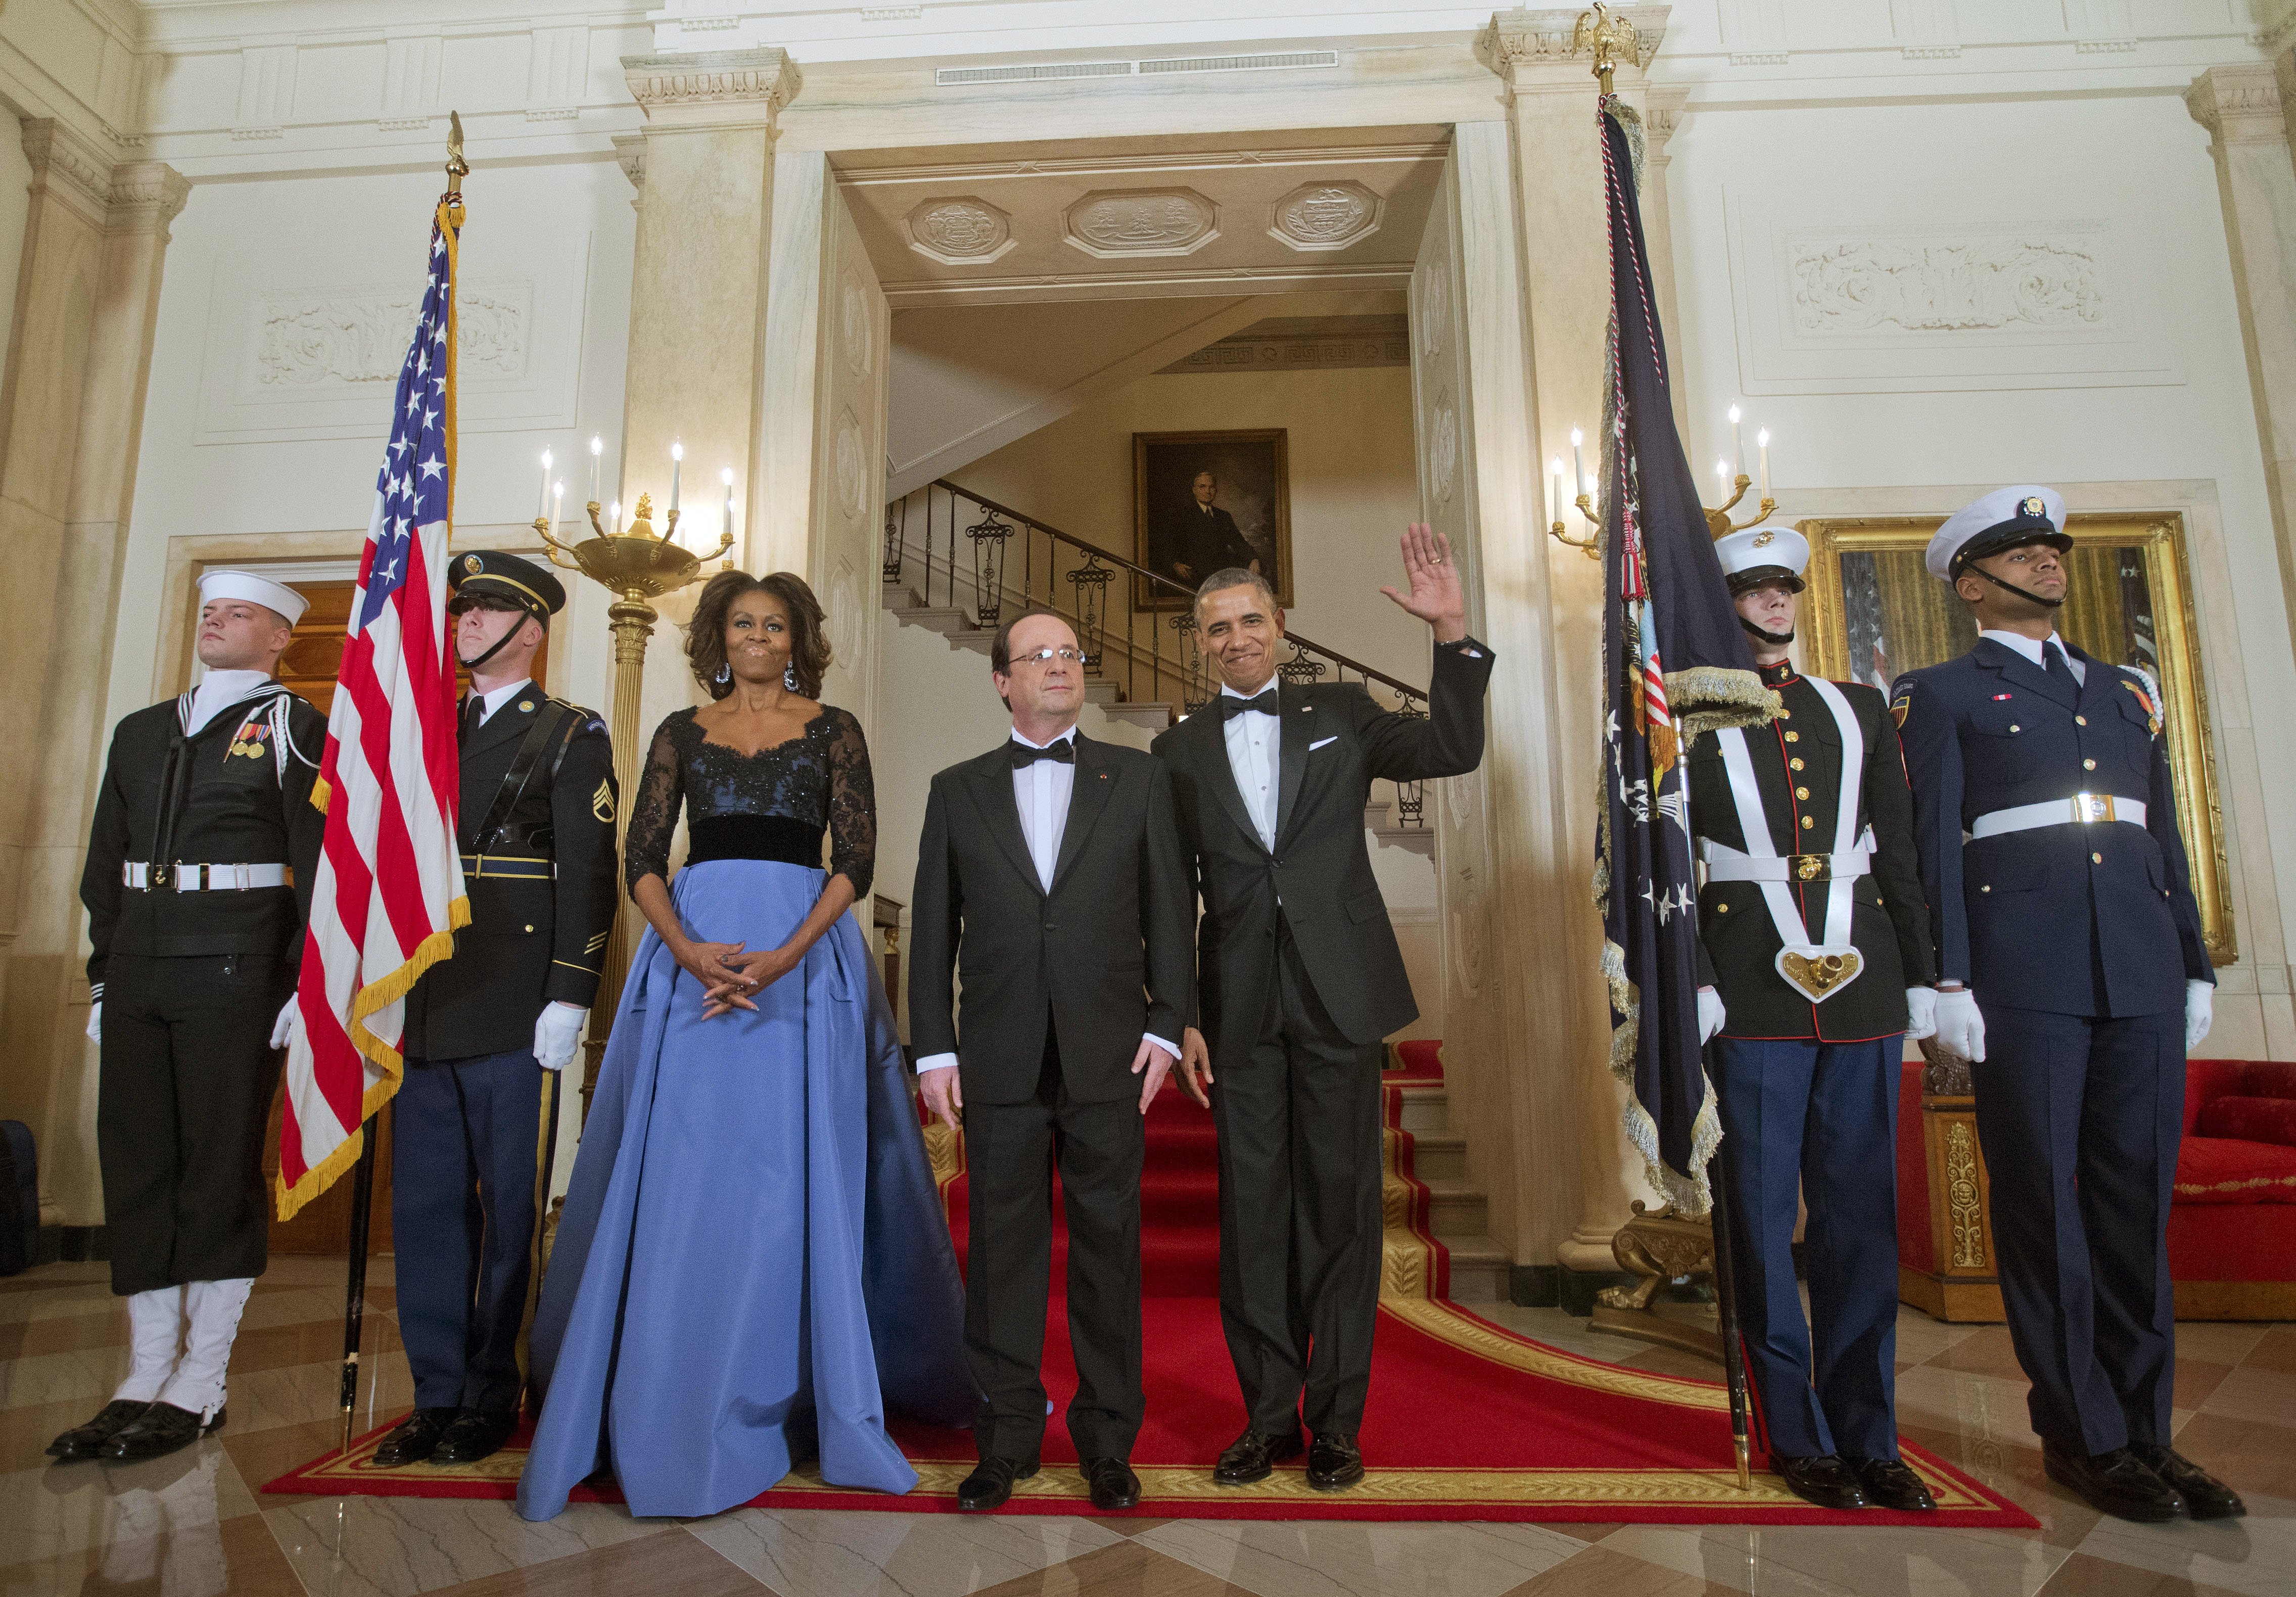 First Lady Michelle Obama and President Barack Obama with French President Francois Hollande, center, pose at the Grand Staircase as they arrive for a State Dinner, Tuesday, Feb. 11, 2014, at the White House in Washington. (Pablo Martinez Monsivais—AP)